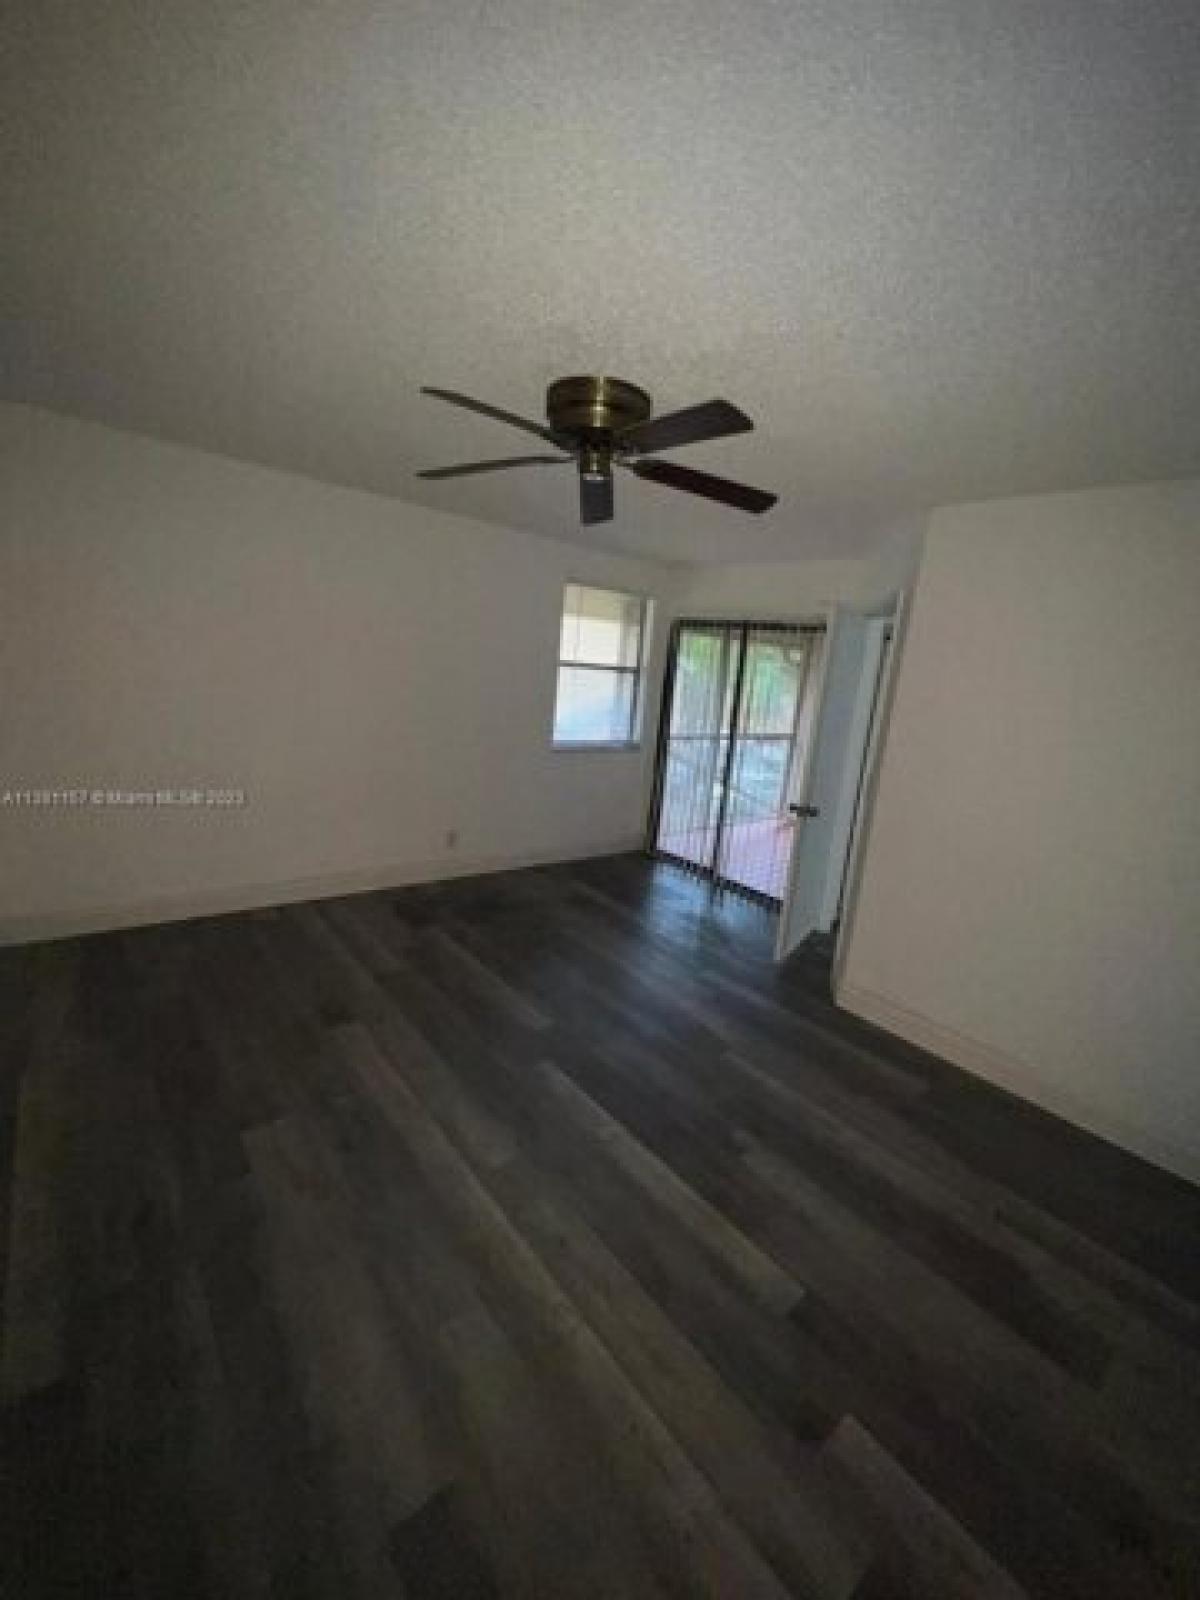 Picture of Home For Rent in Lauderhill, Florida, United States